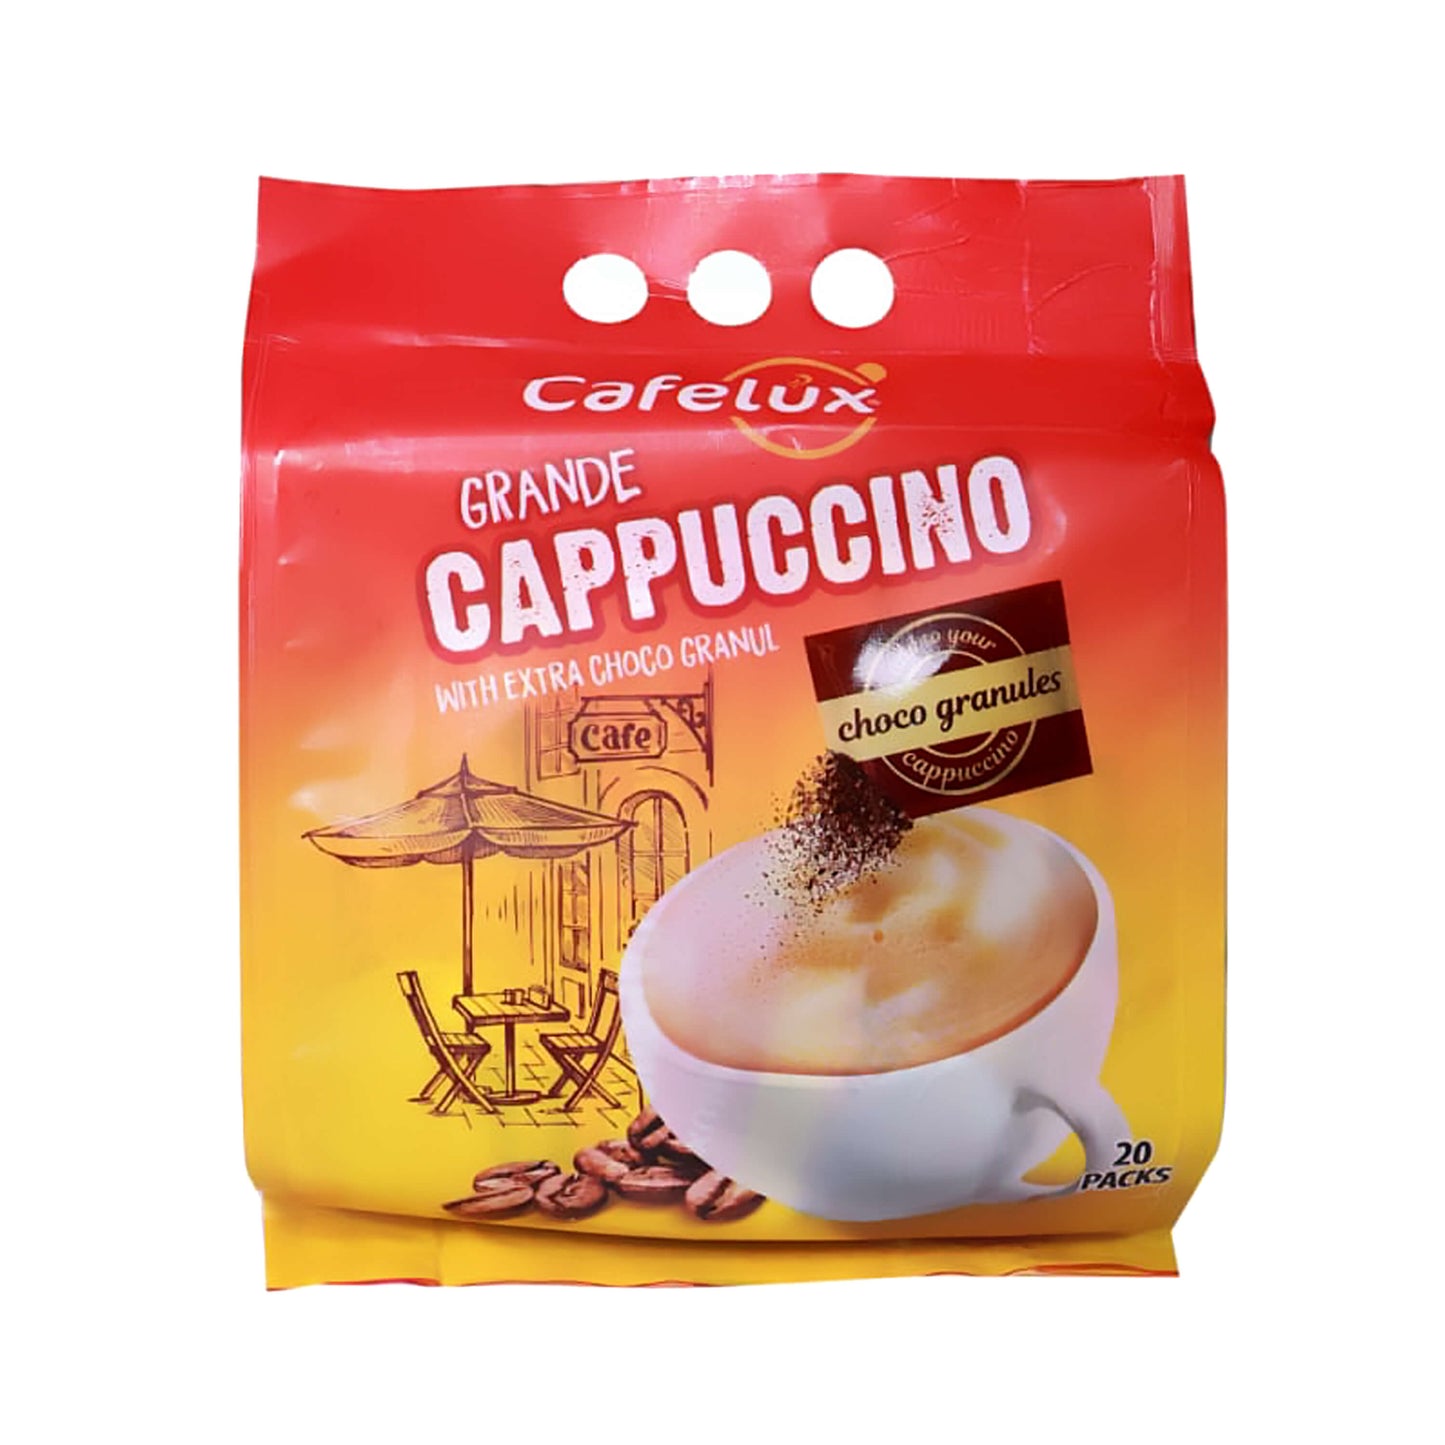 Cafelux Grande Capppuccino (With Choco Granule) - Whiteoak Online 